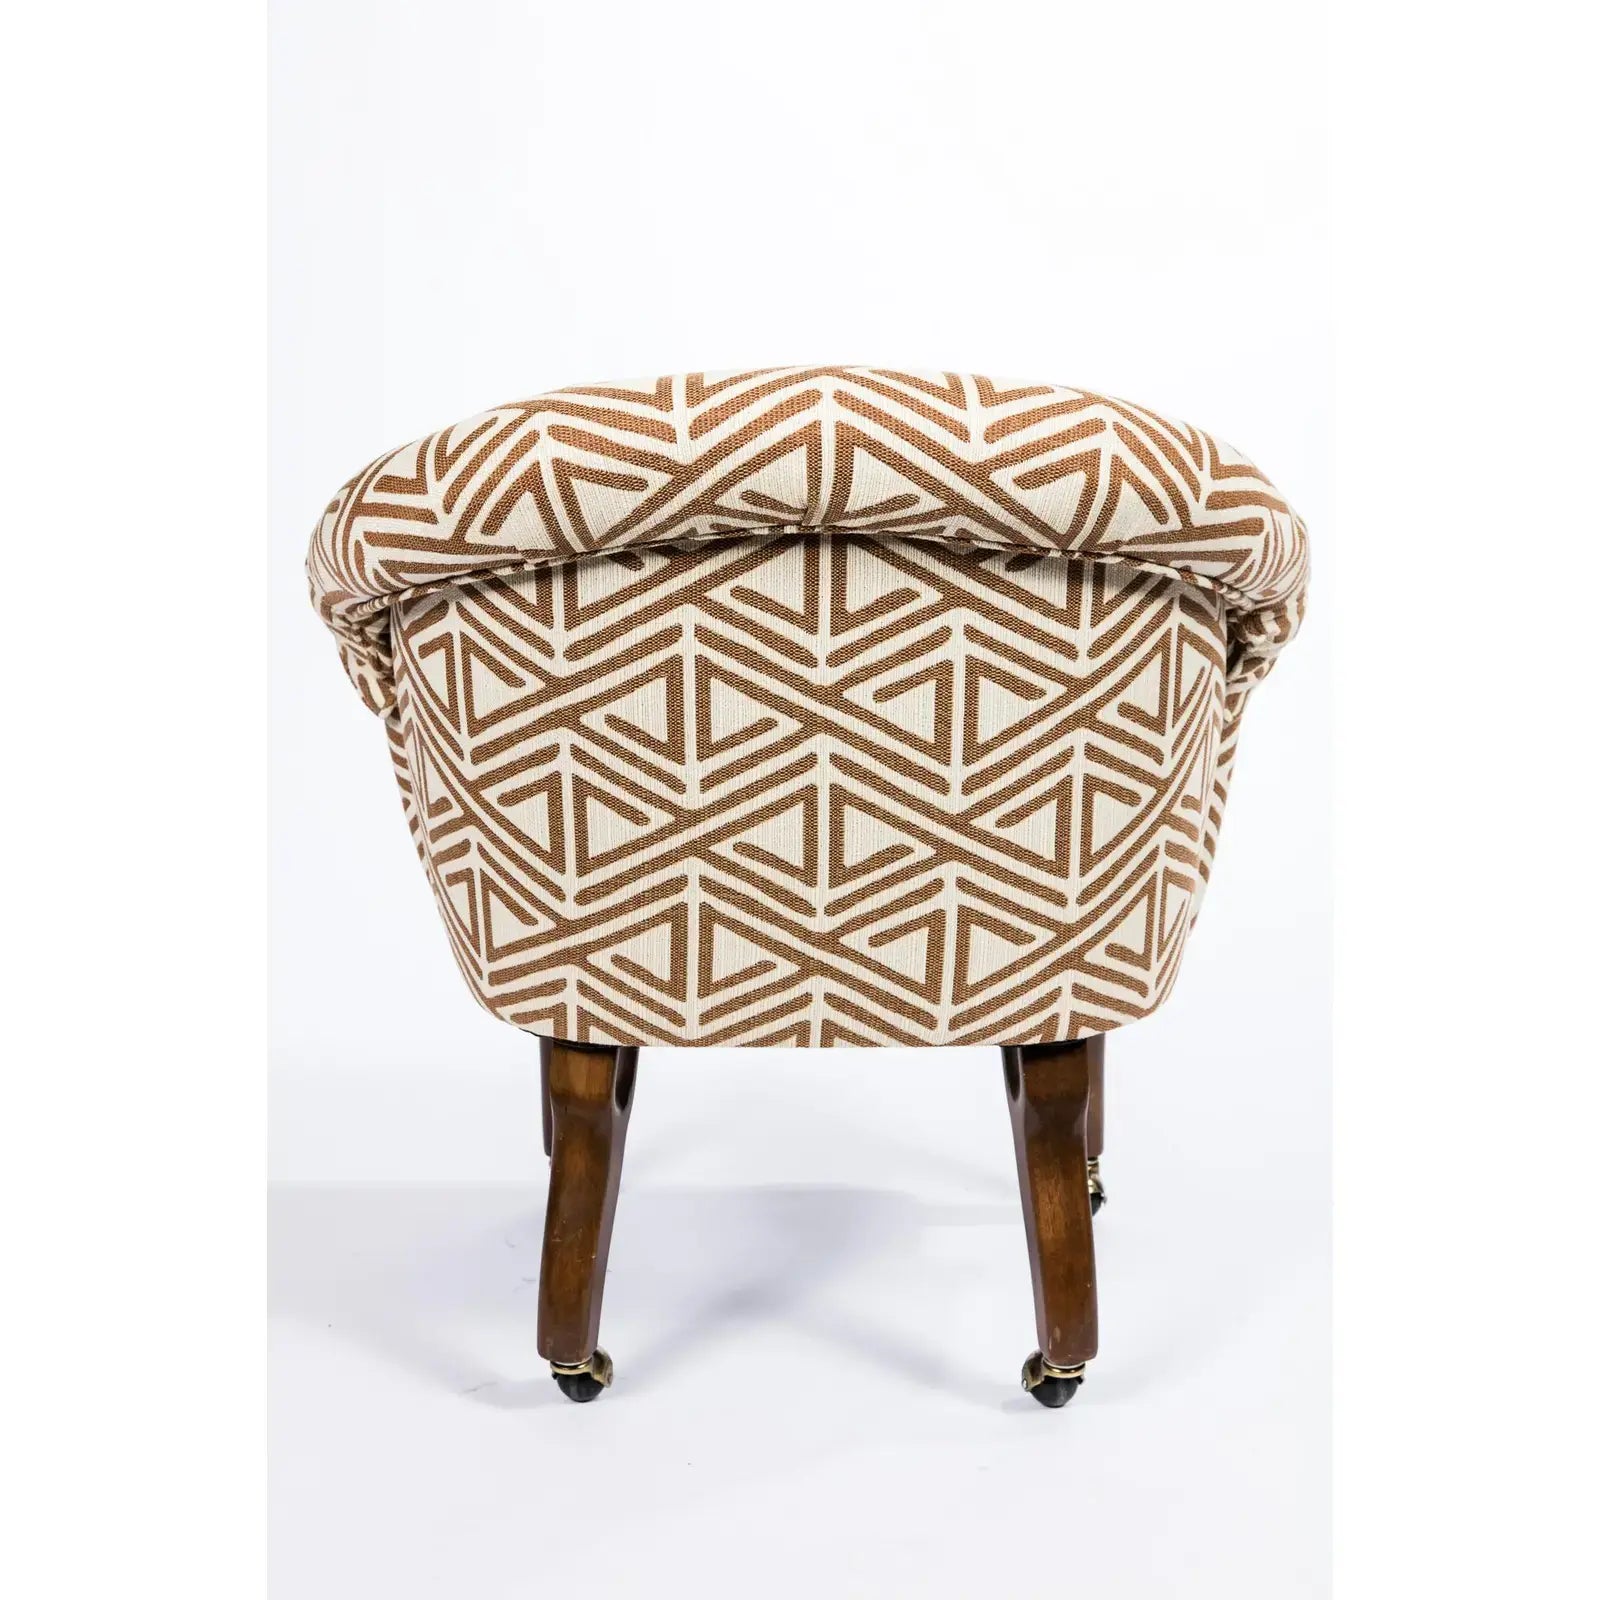 Patterned Vintage Tufted Chairs (Pair)